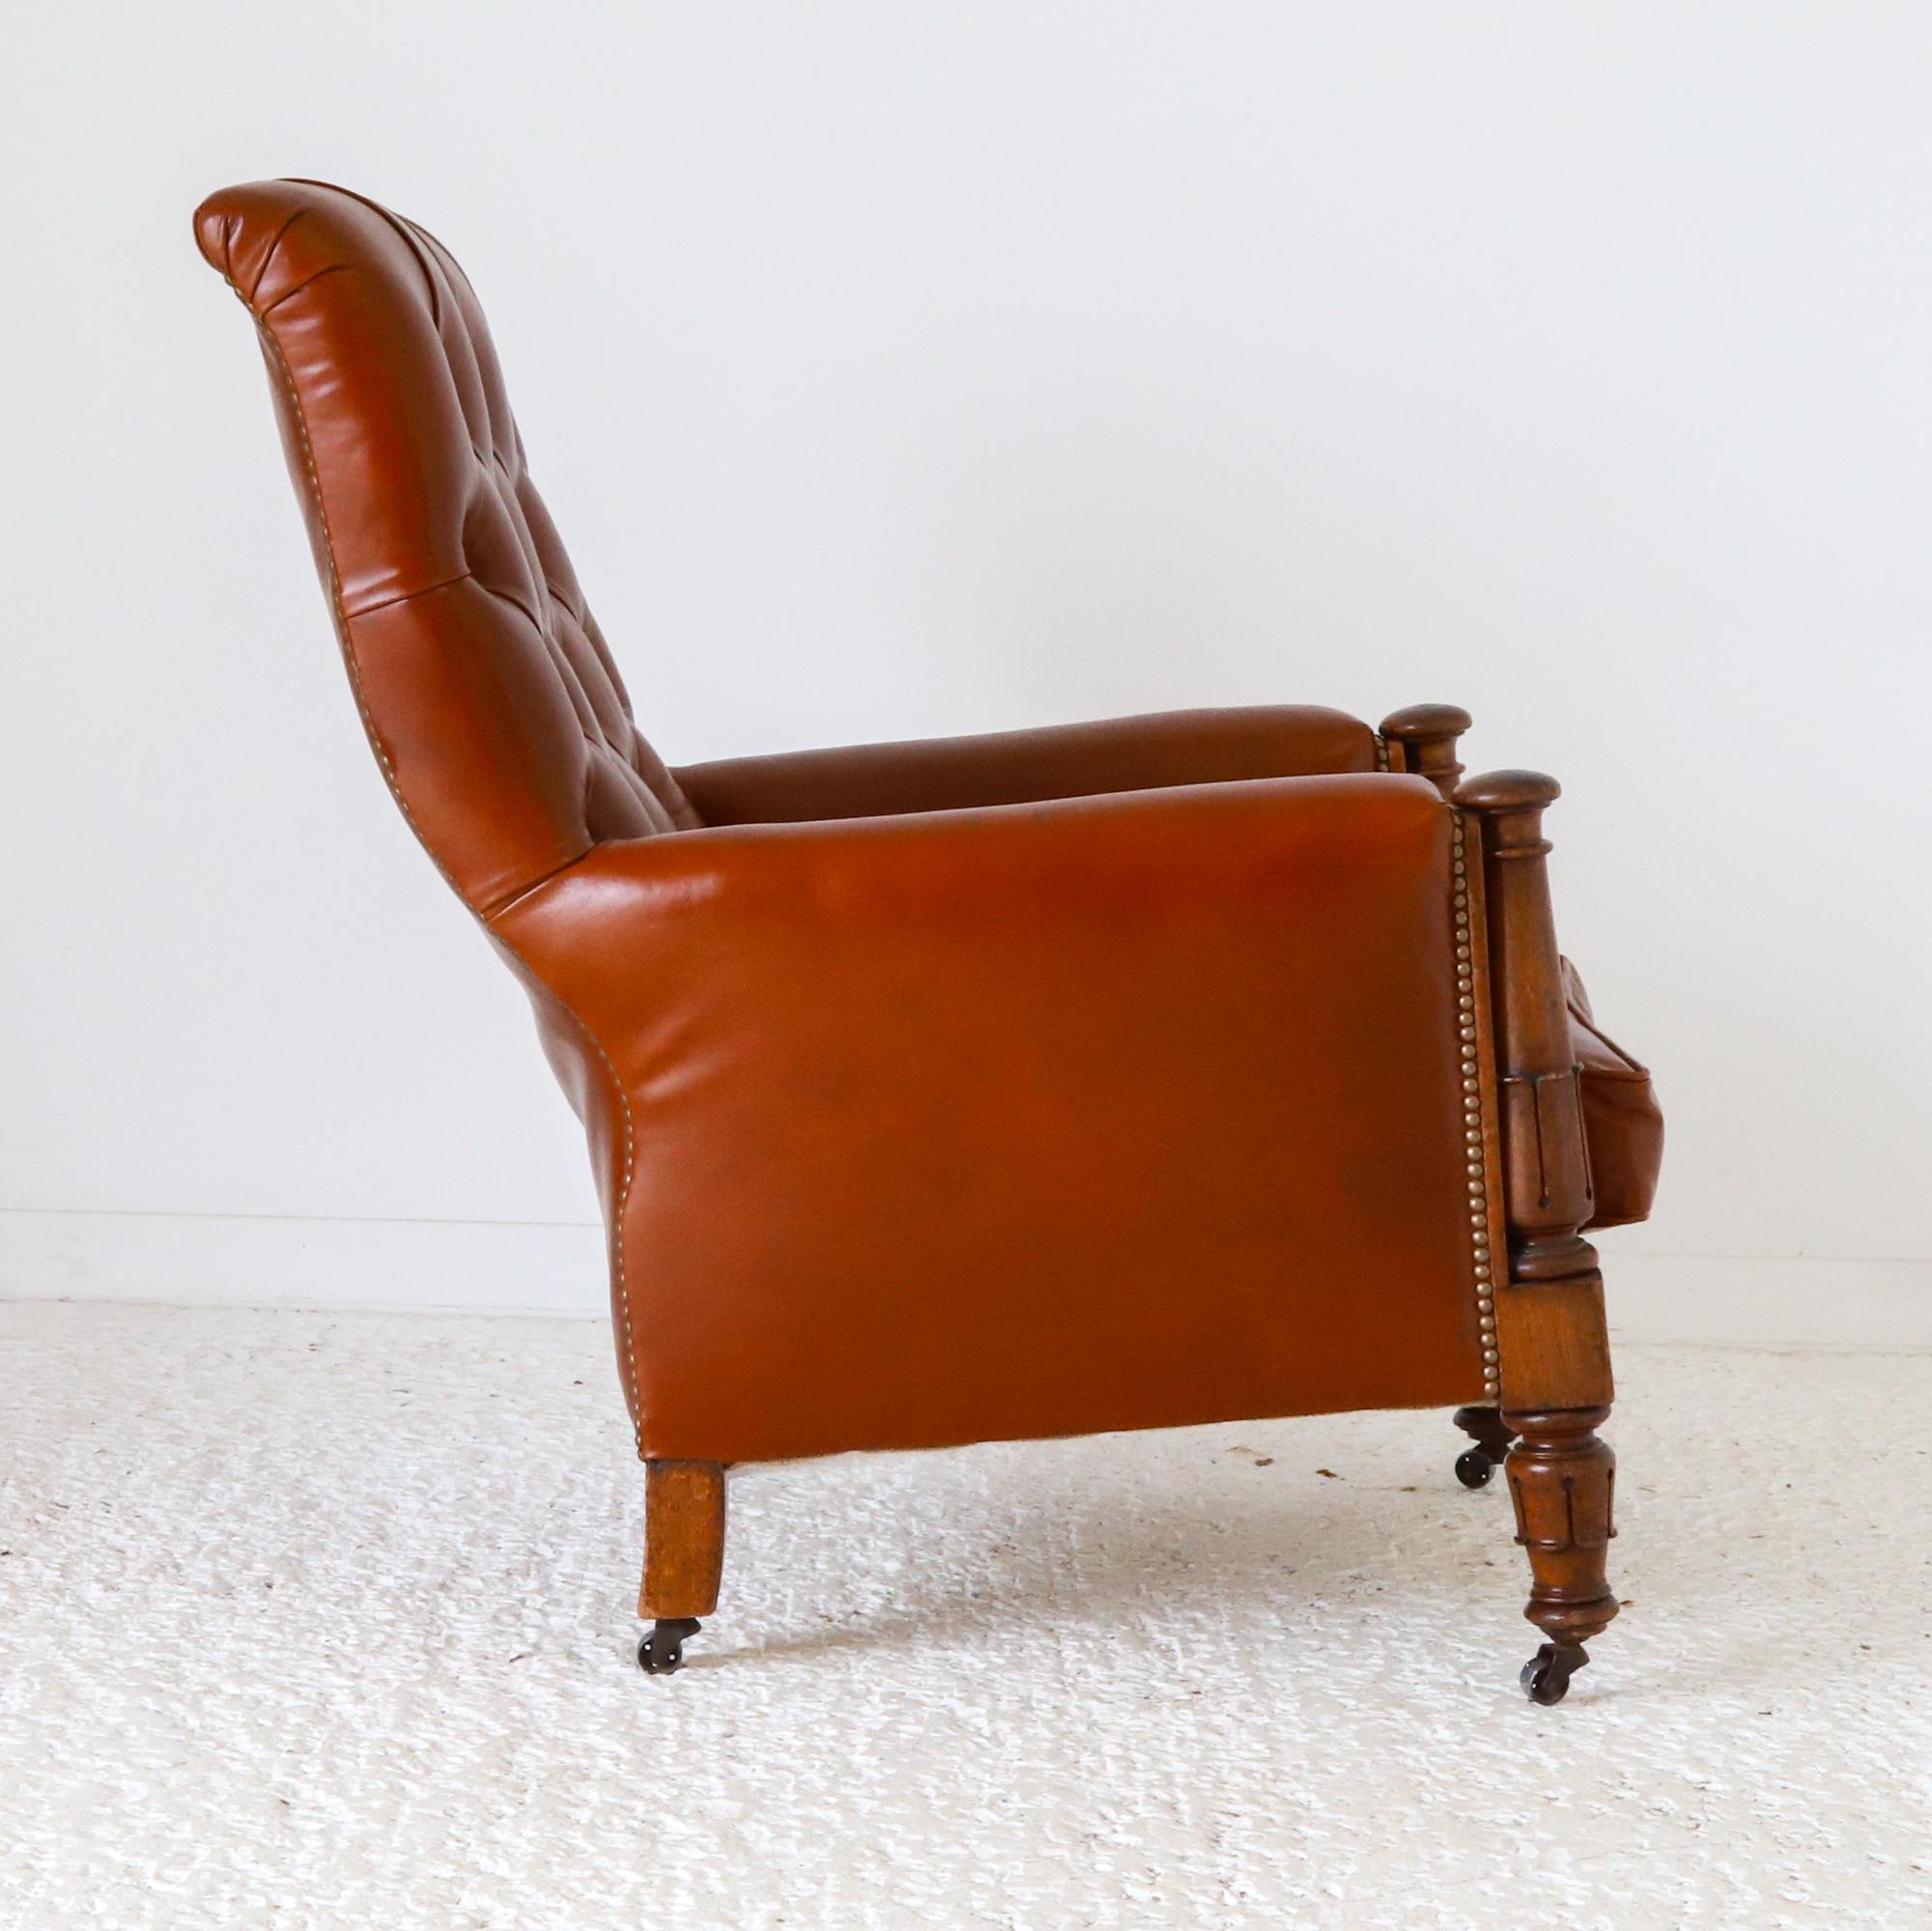 English c. 1830 Mahogany William IV Library Chair reupholstered in tan leather  For Sale 5